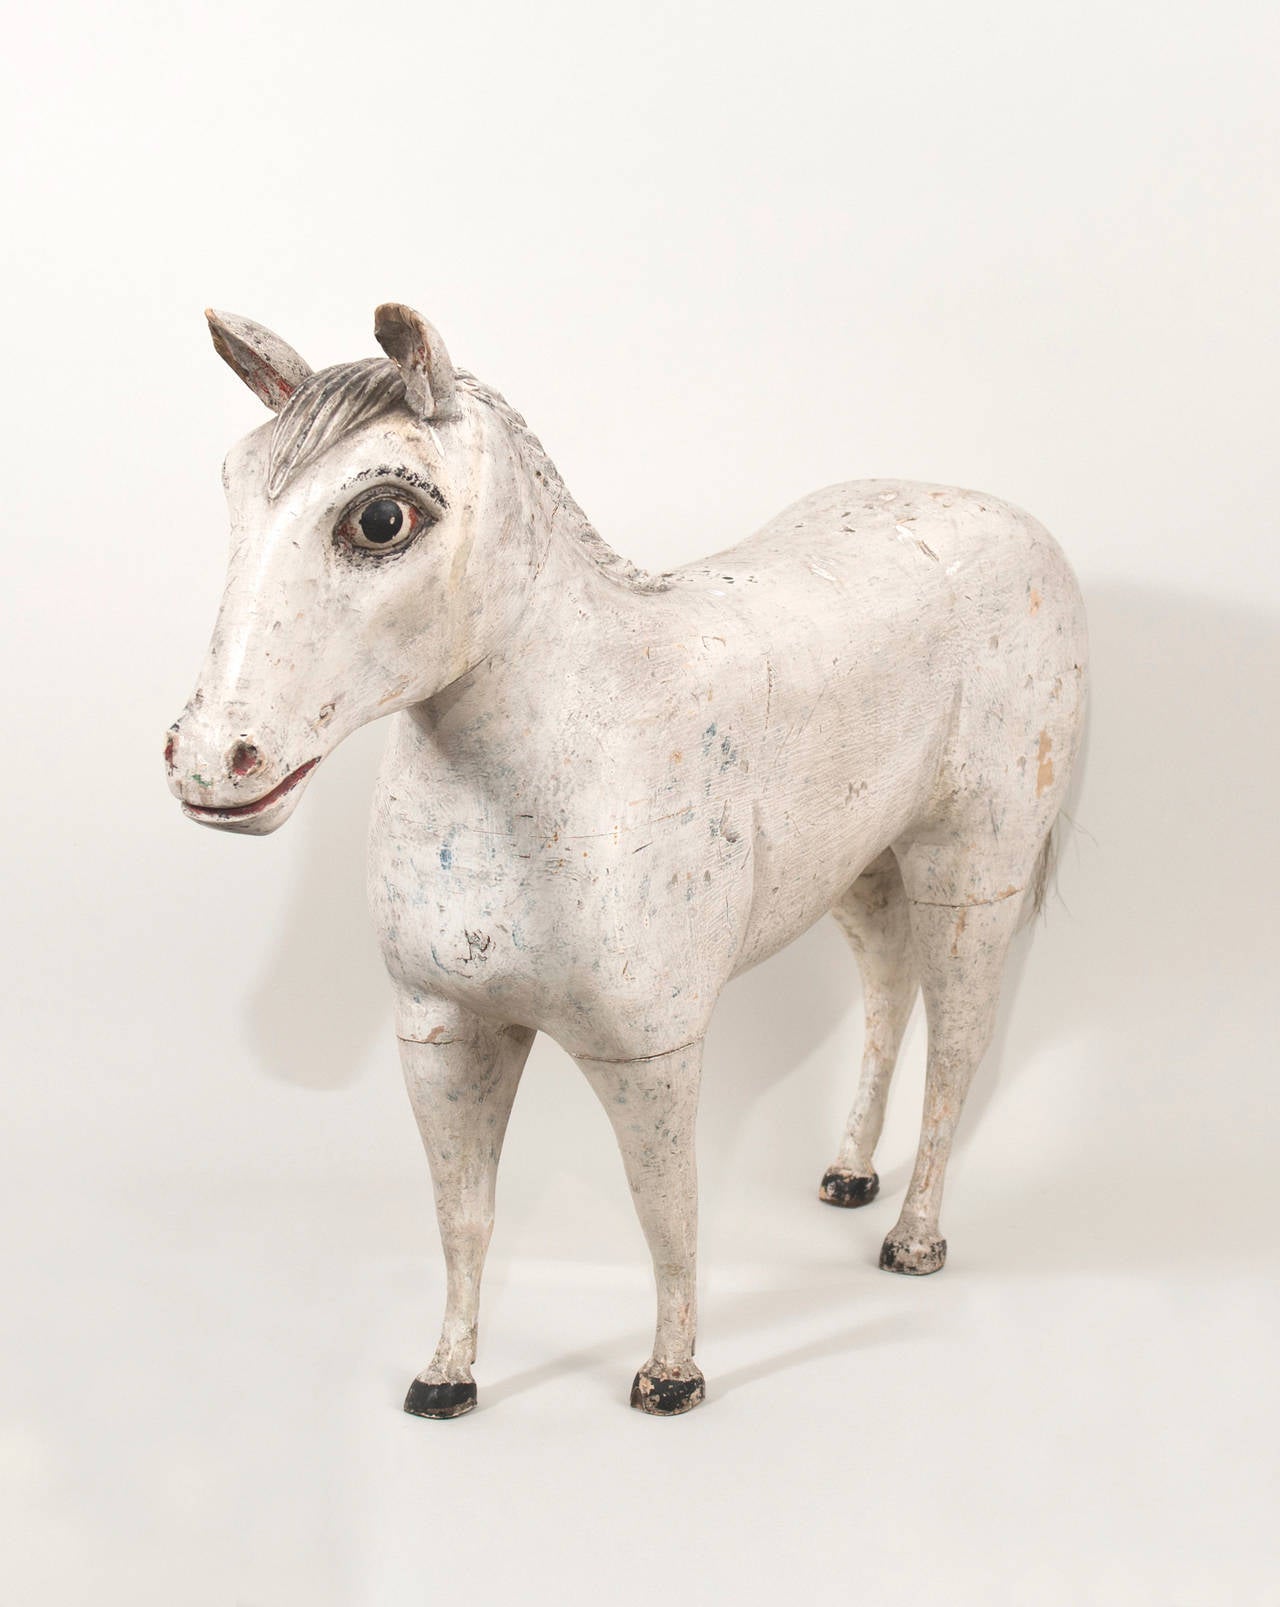 20th Century American Folk Art Carved Wood Horse with Original Paint, circa 1900